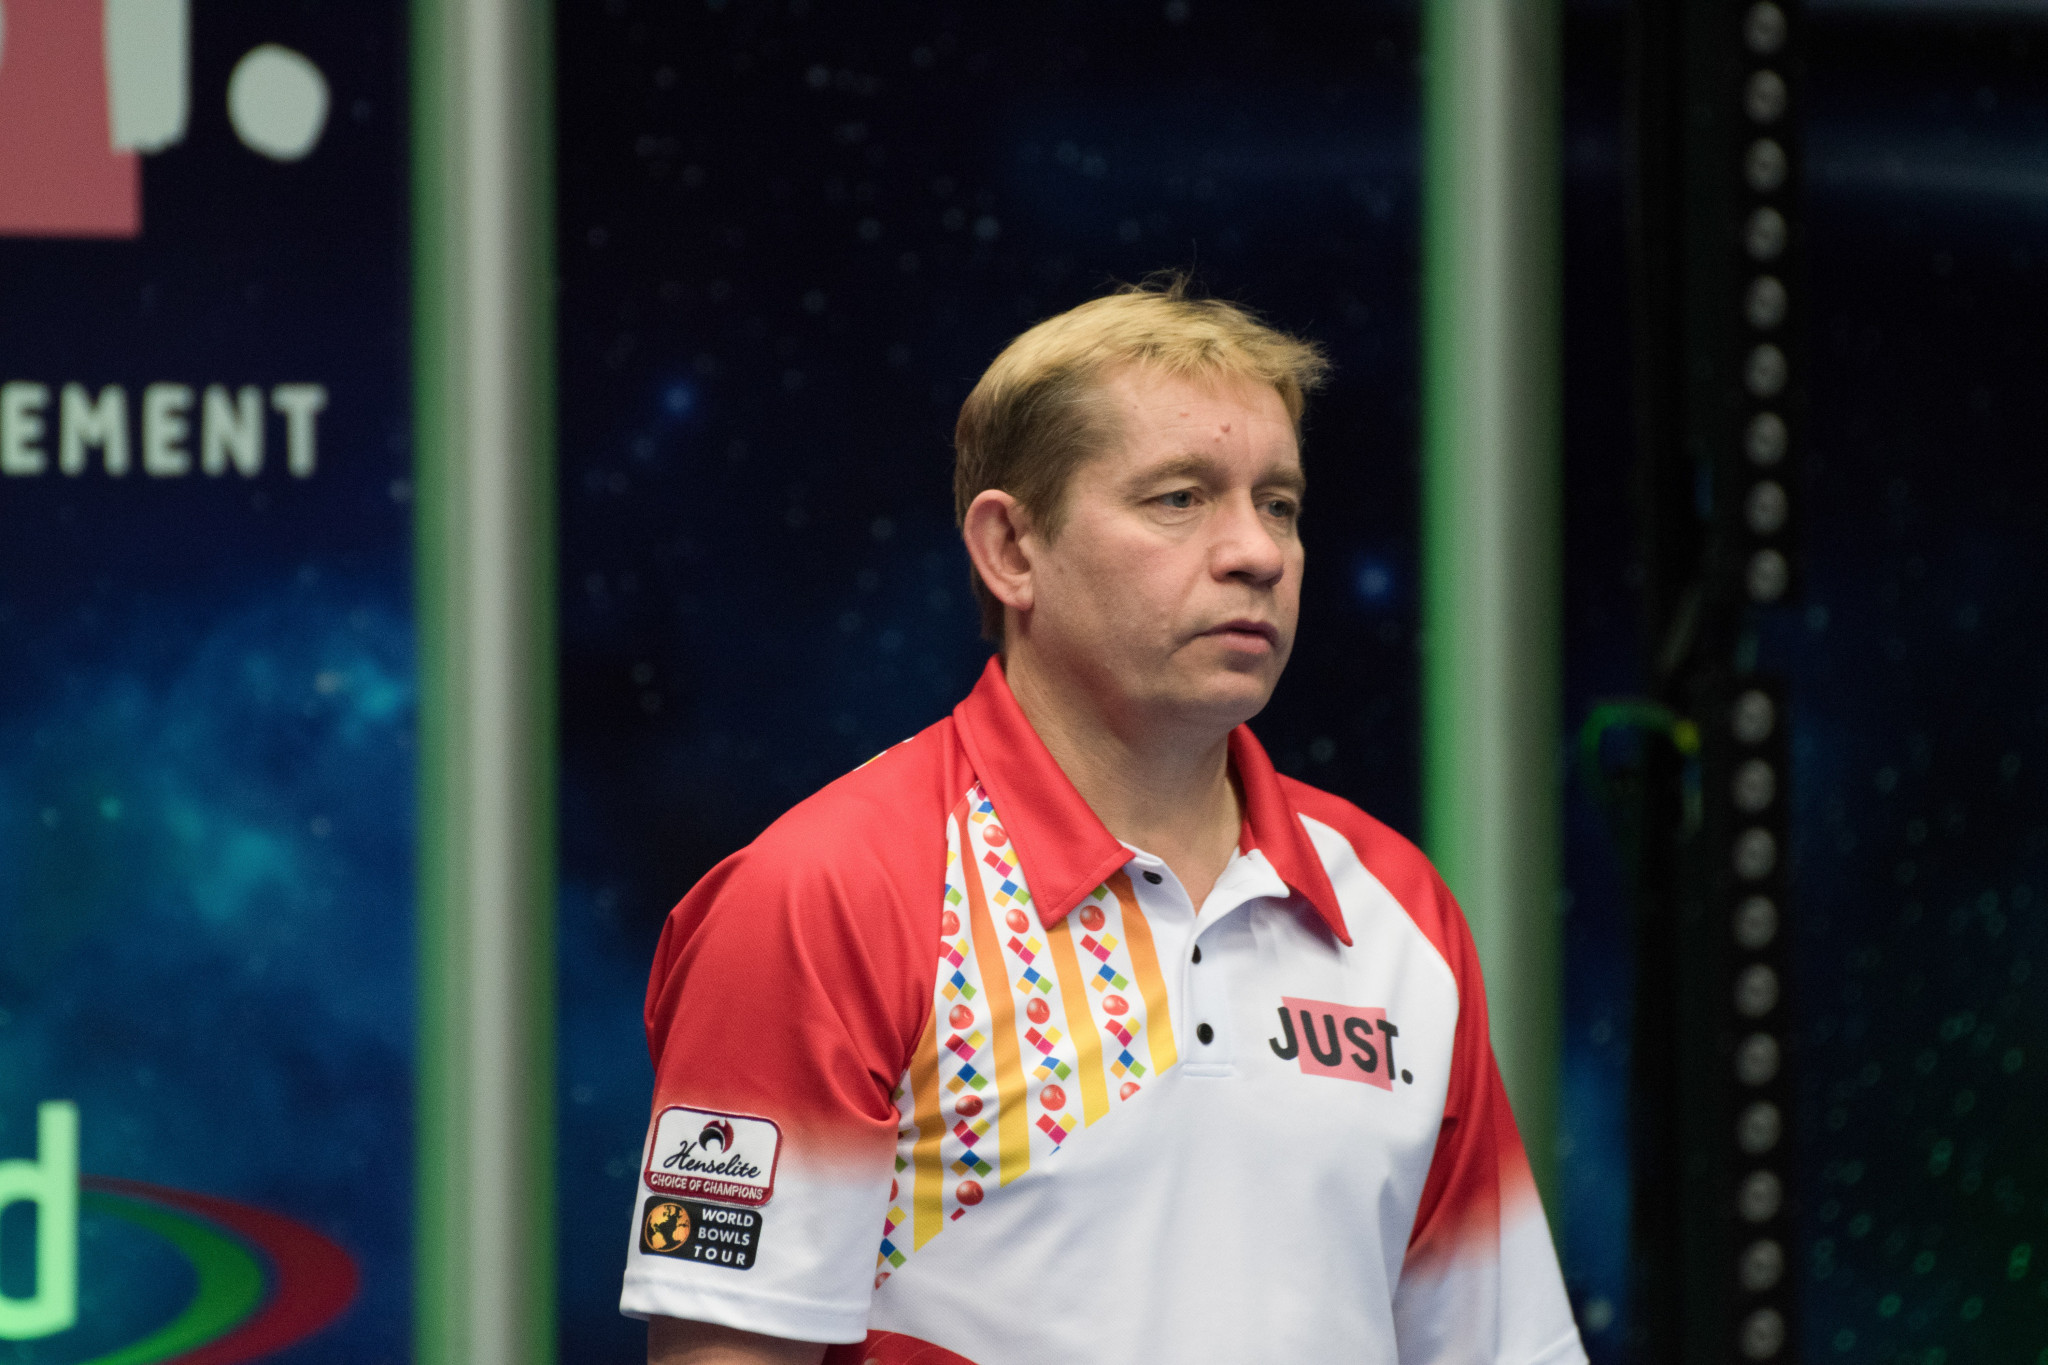 Greg Harlow will be hoping to go one step further at this tournament after finishing second last year ©World Bowls Tour